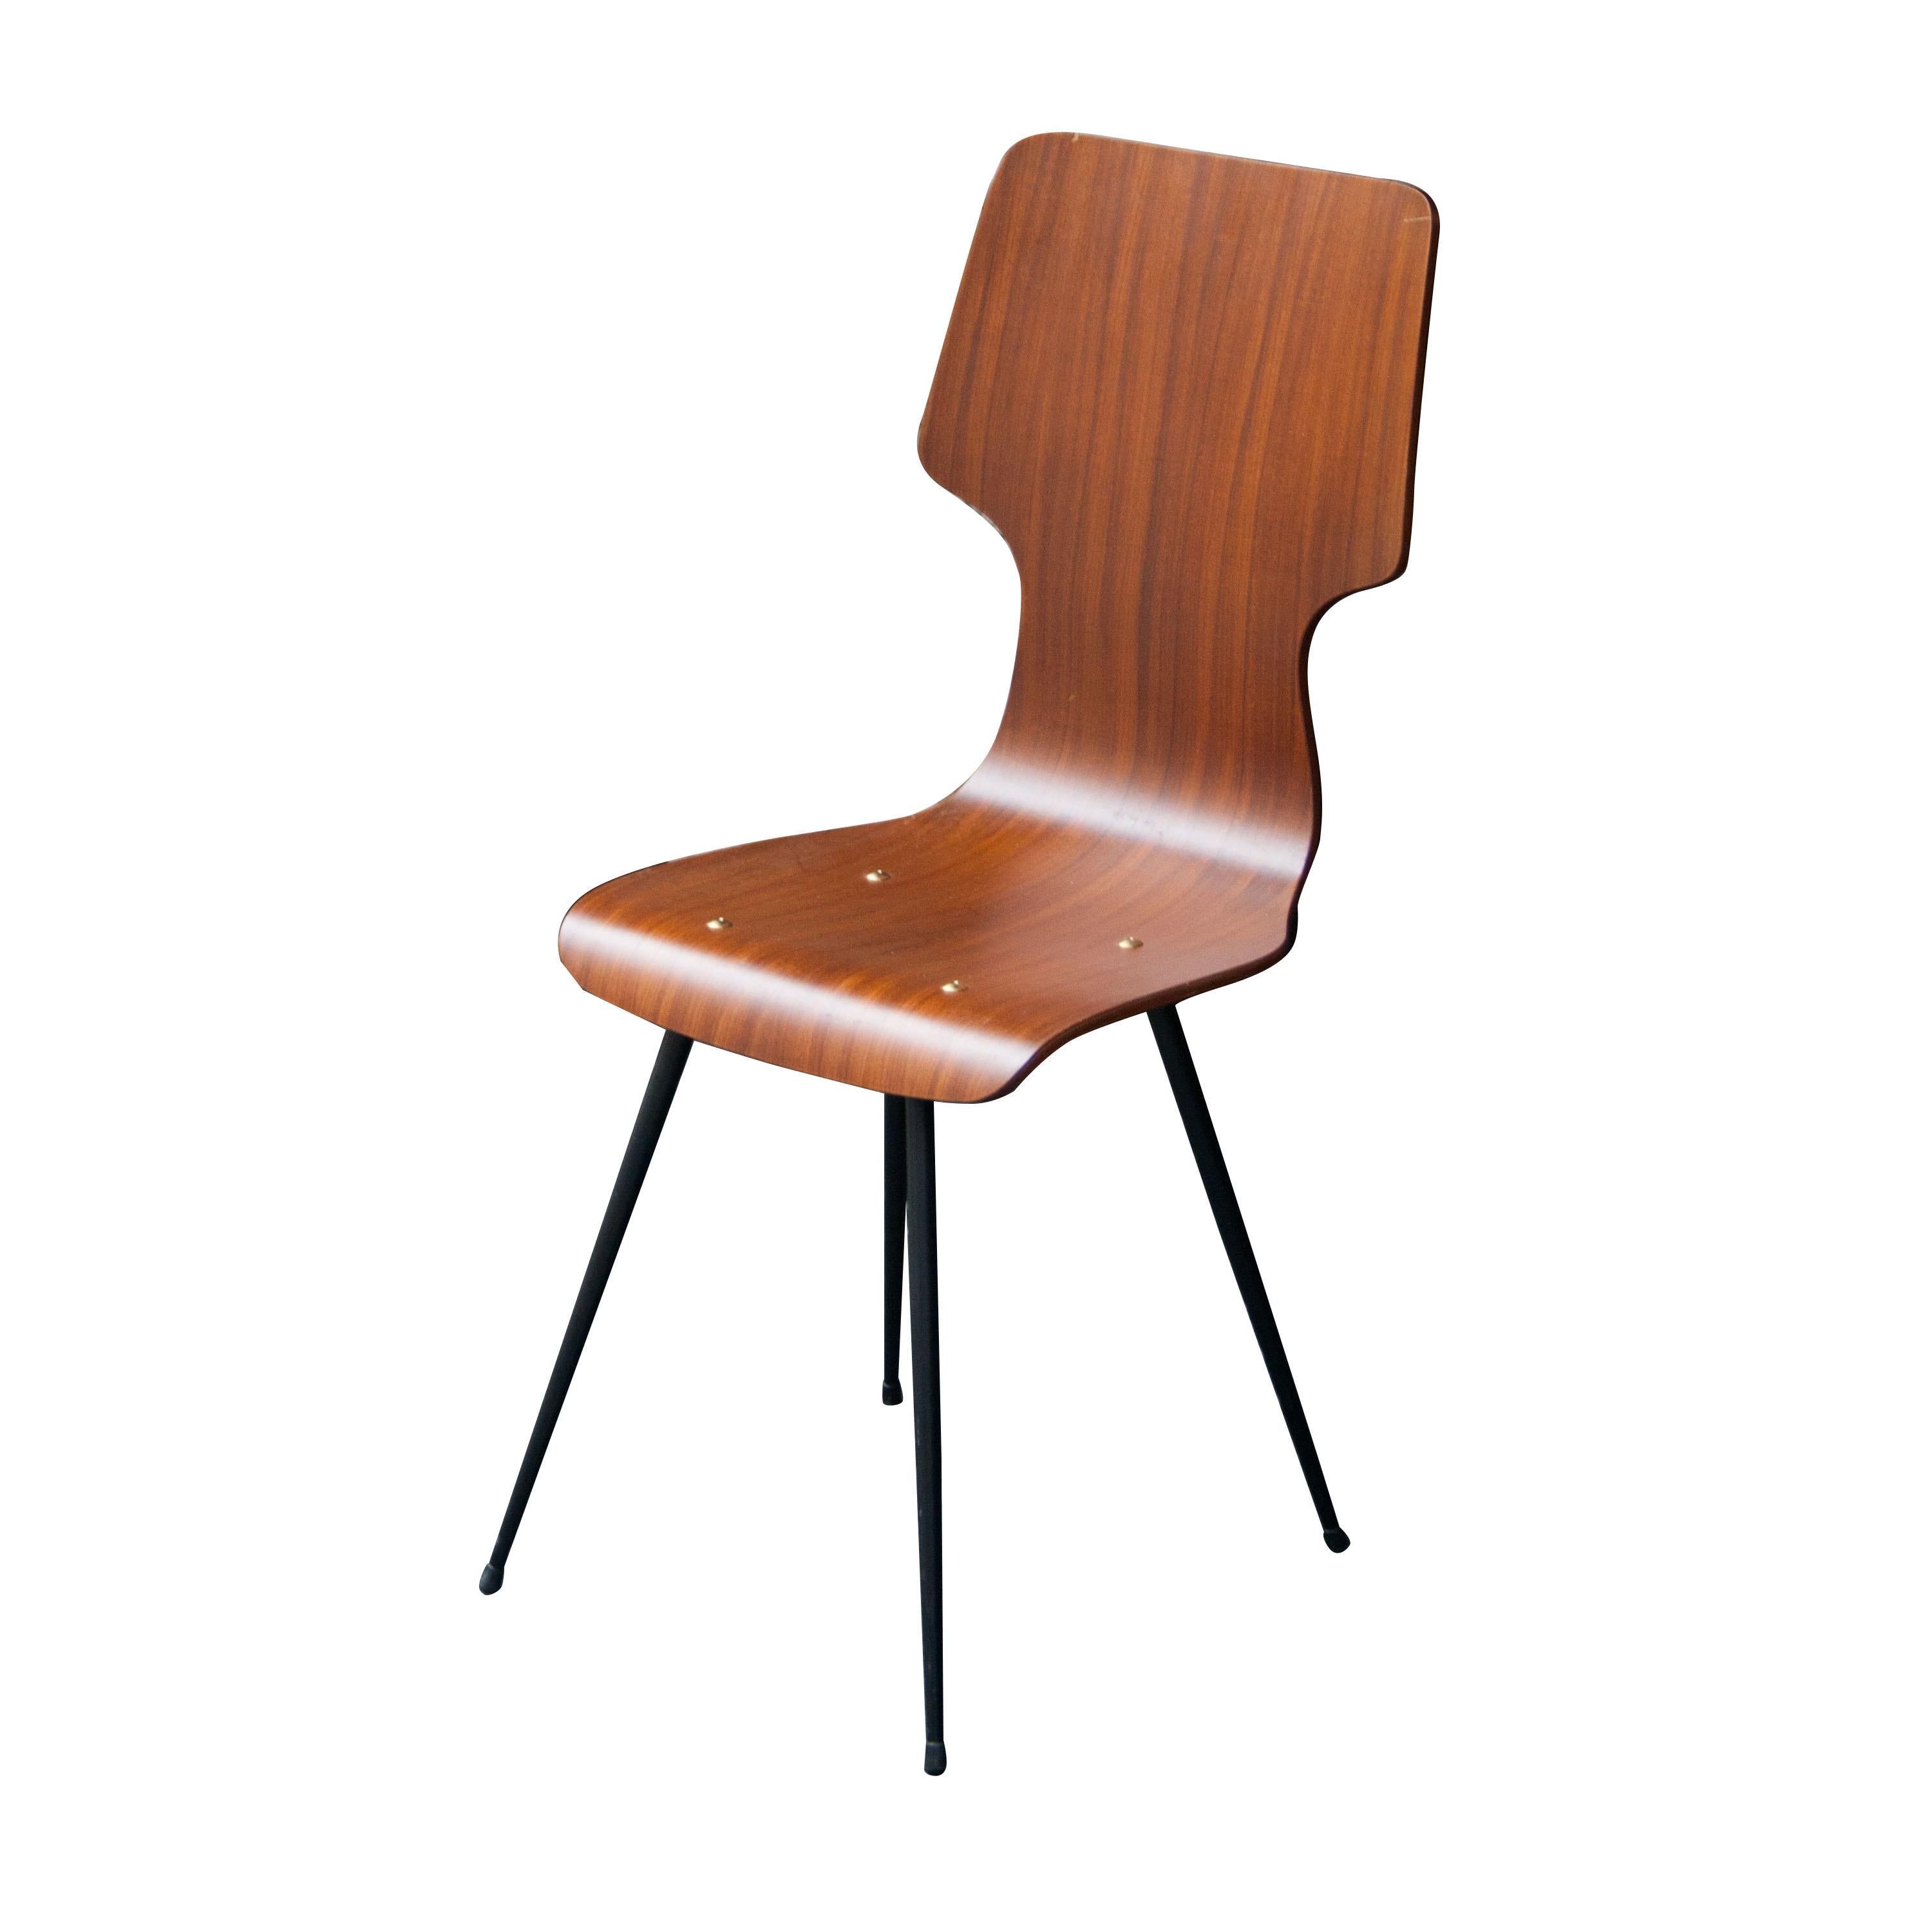 Set of six chairs designed by Carlo Ratti. Black lacquered metallic structure, seat and back in teak wood.